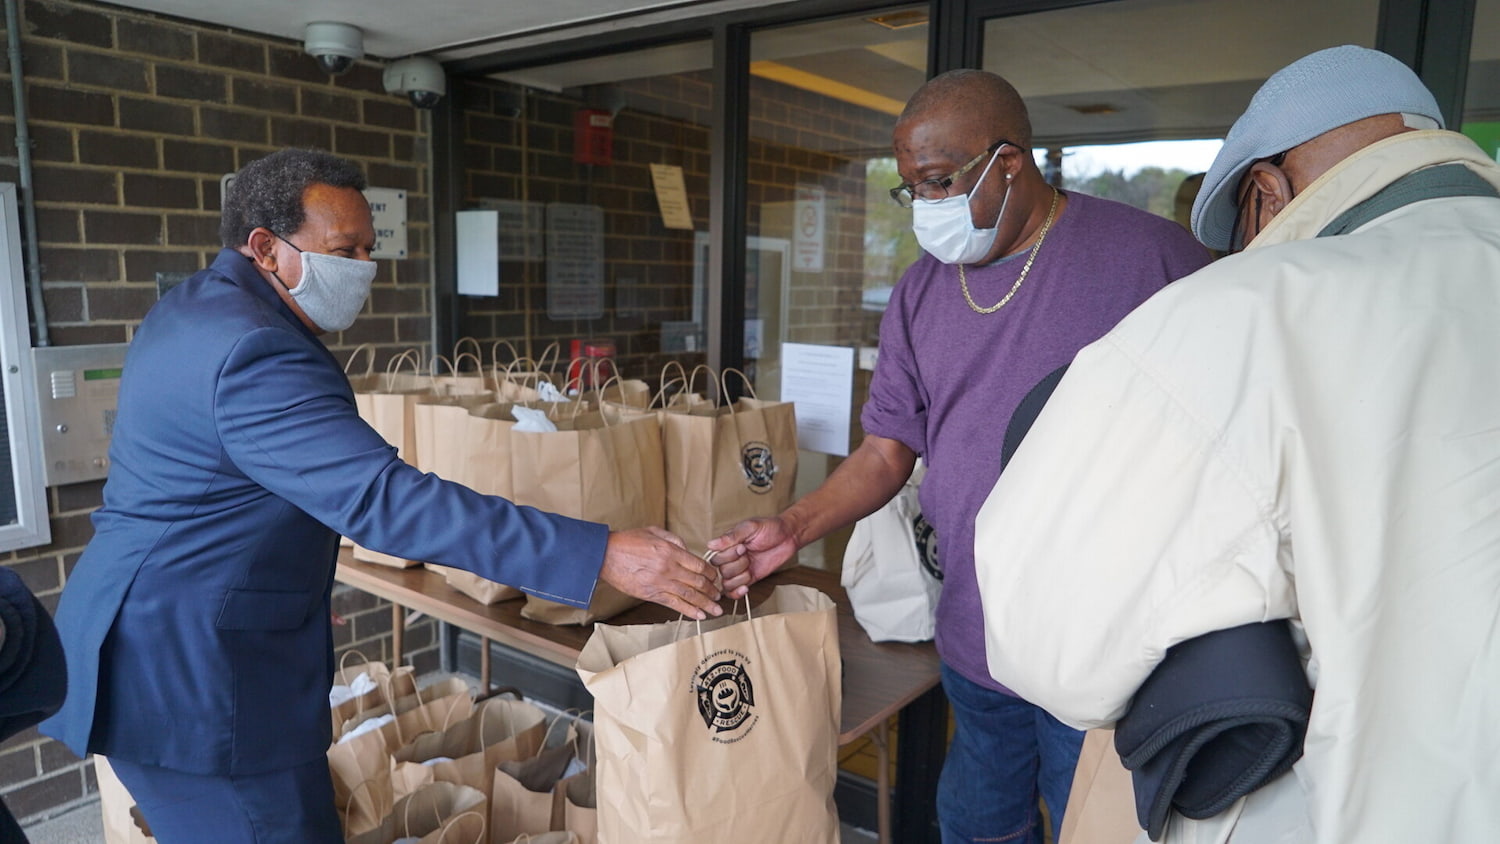 412 Food Rescue & Housing Authority of the City of Pittsburgh: Eradicating Hunger In Pittsburgh Communities